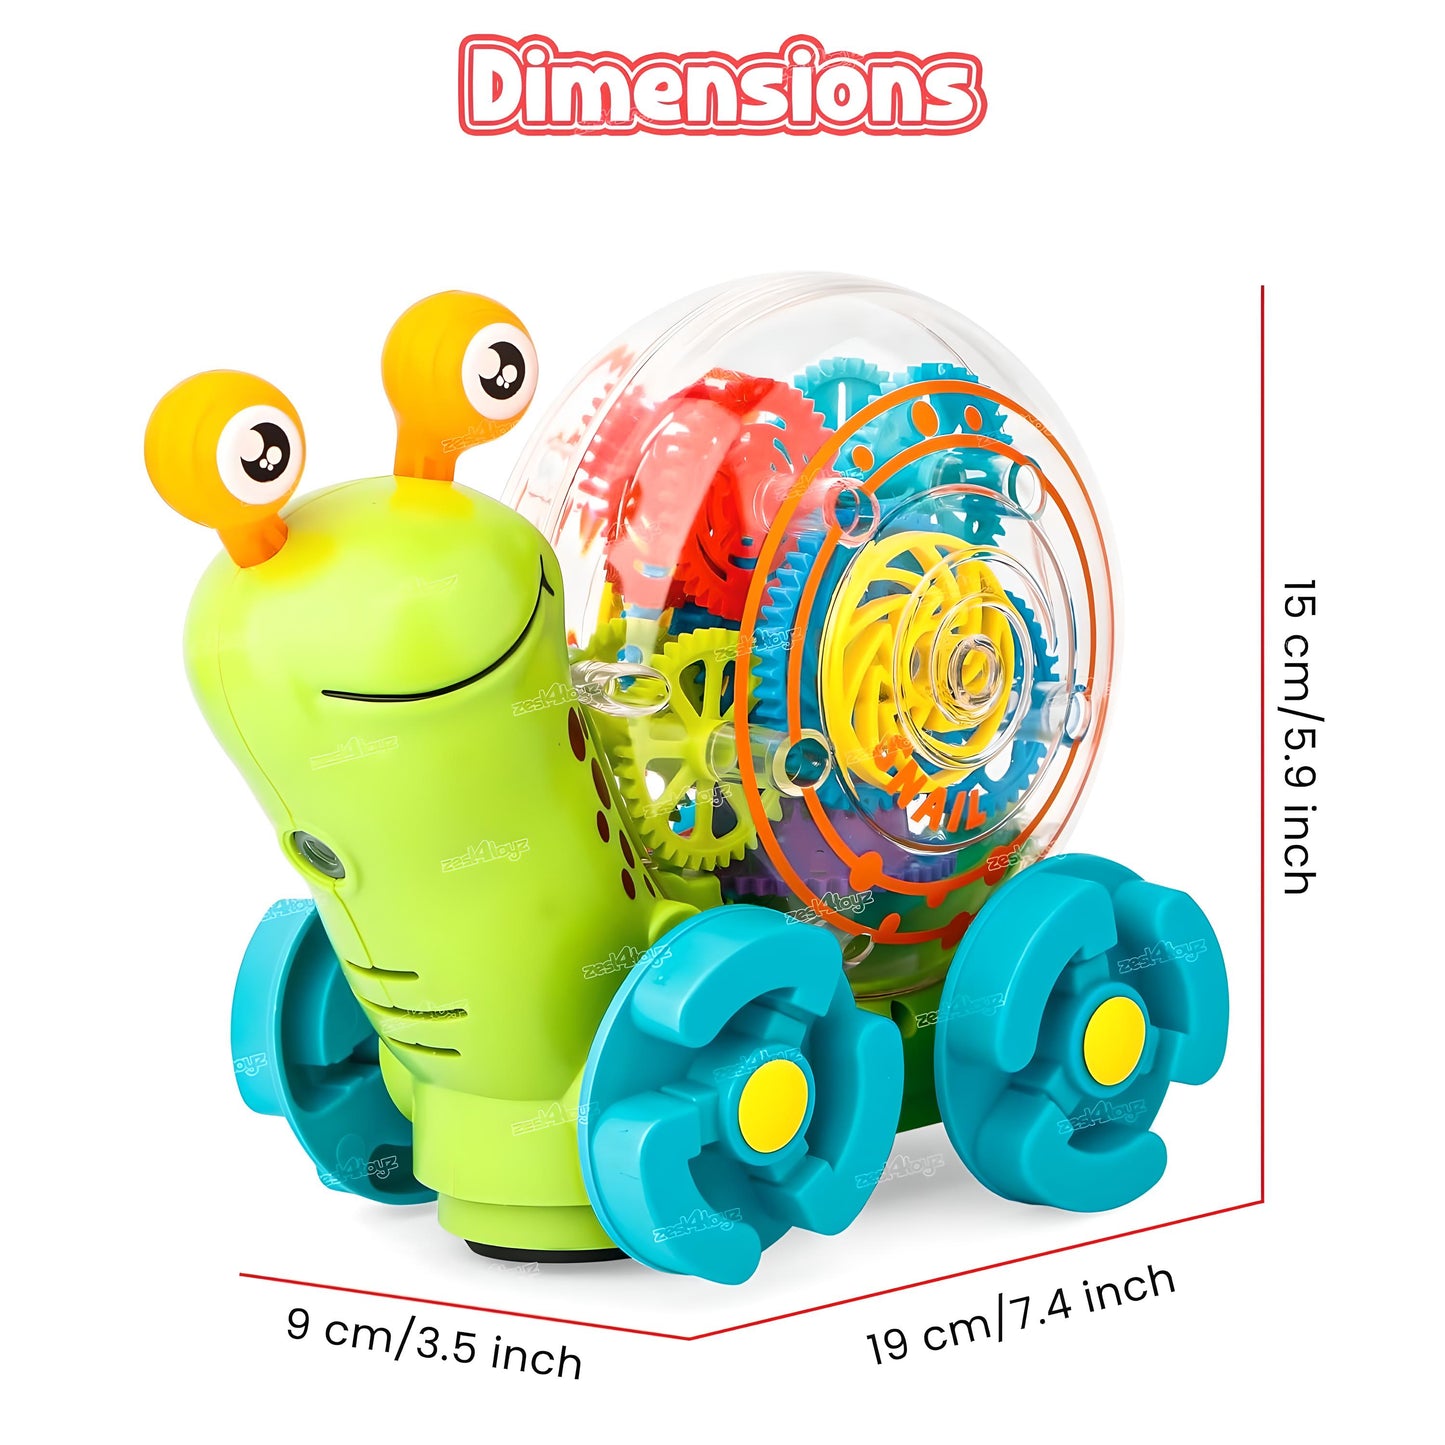 MM TOYS Transparent Snail Projector Toy with Musical Gear Sound and Light Entertainment for Boys and Girls